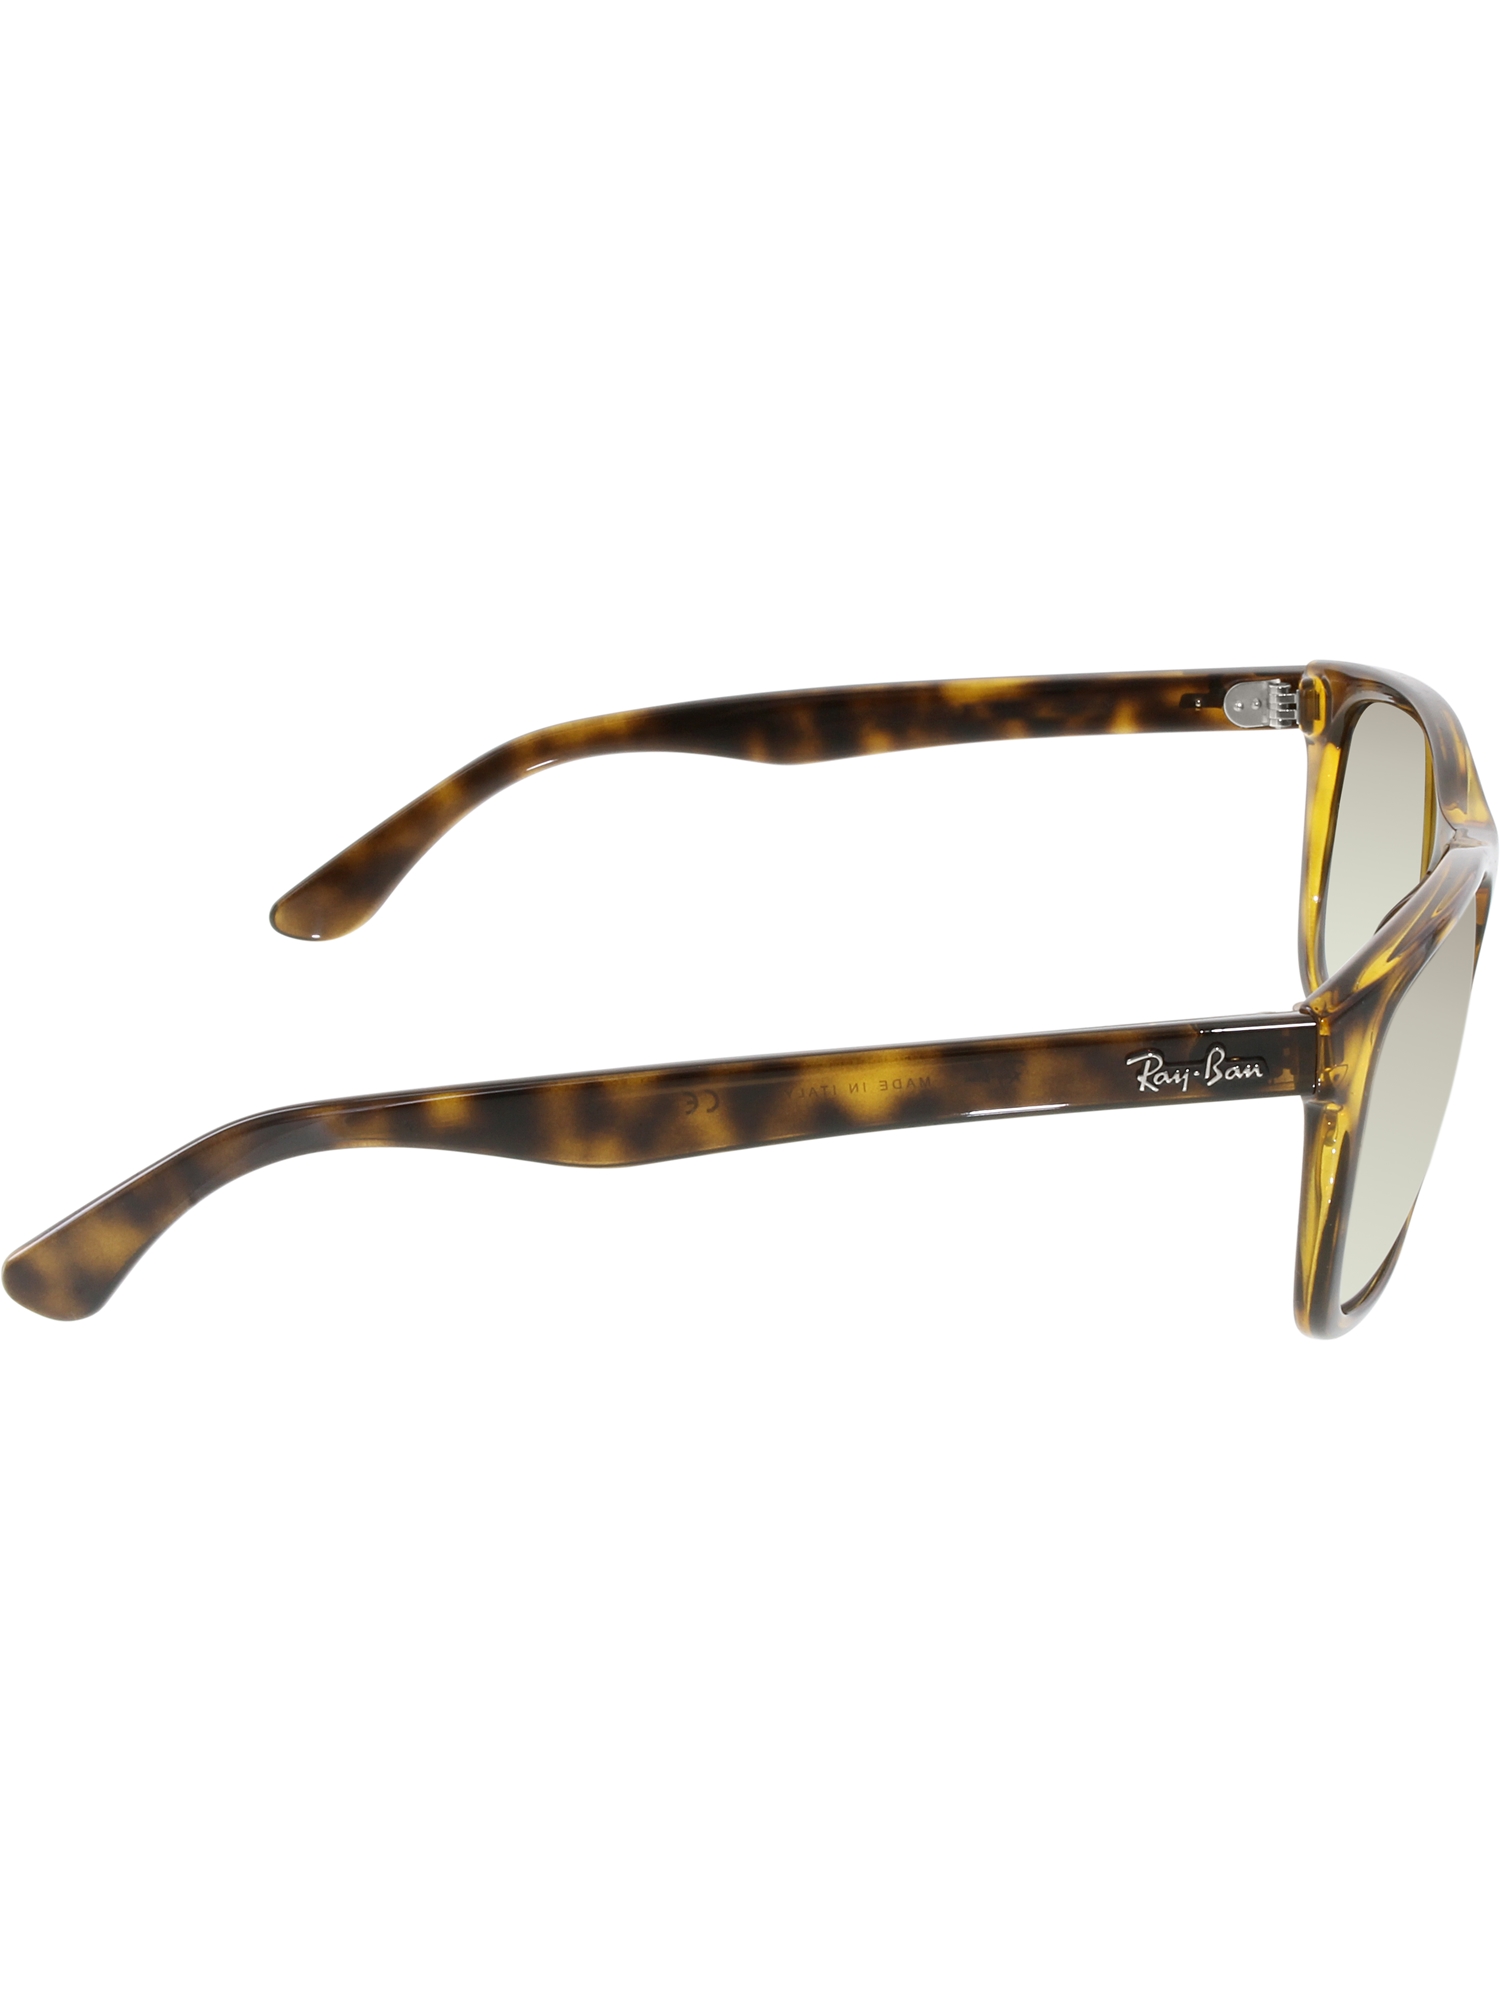 Ray Ban RB 4181 710/51 - Tortoise/Brown Gradient by Ray Ban for Men - 57-16-145 mm Sunglasses - image 2 of 3